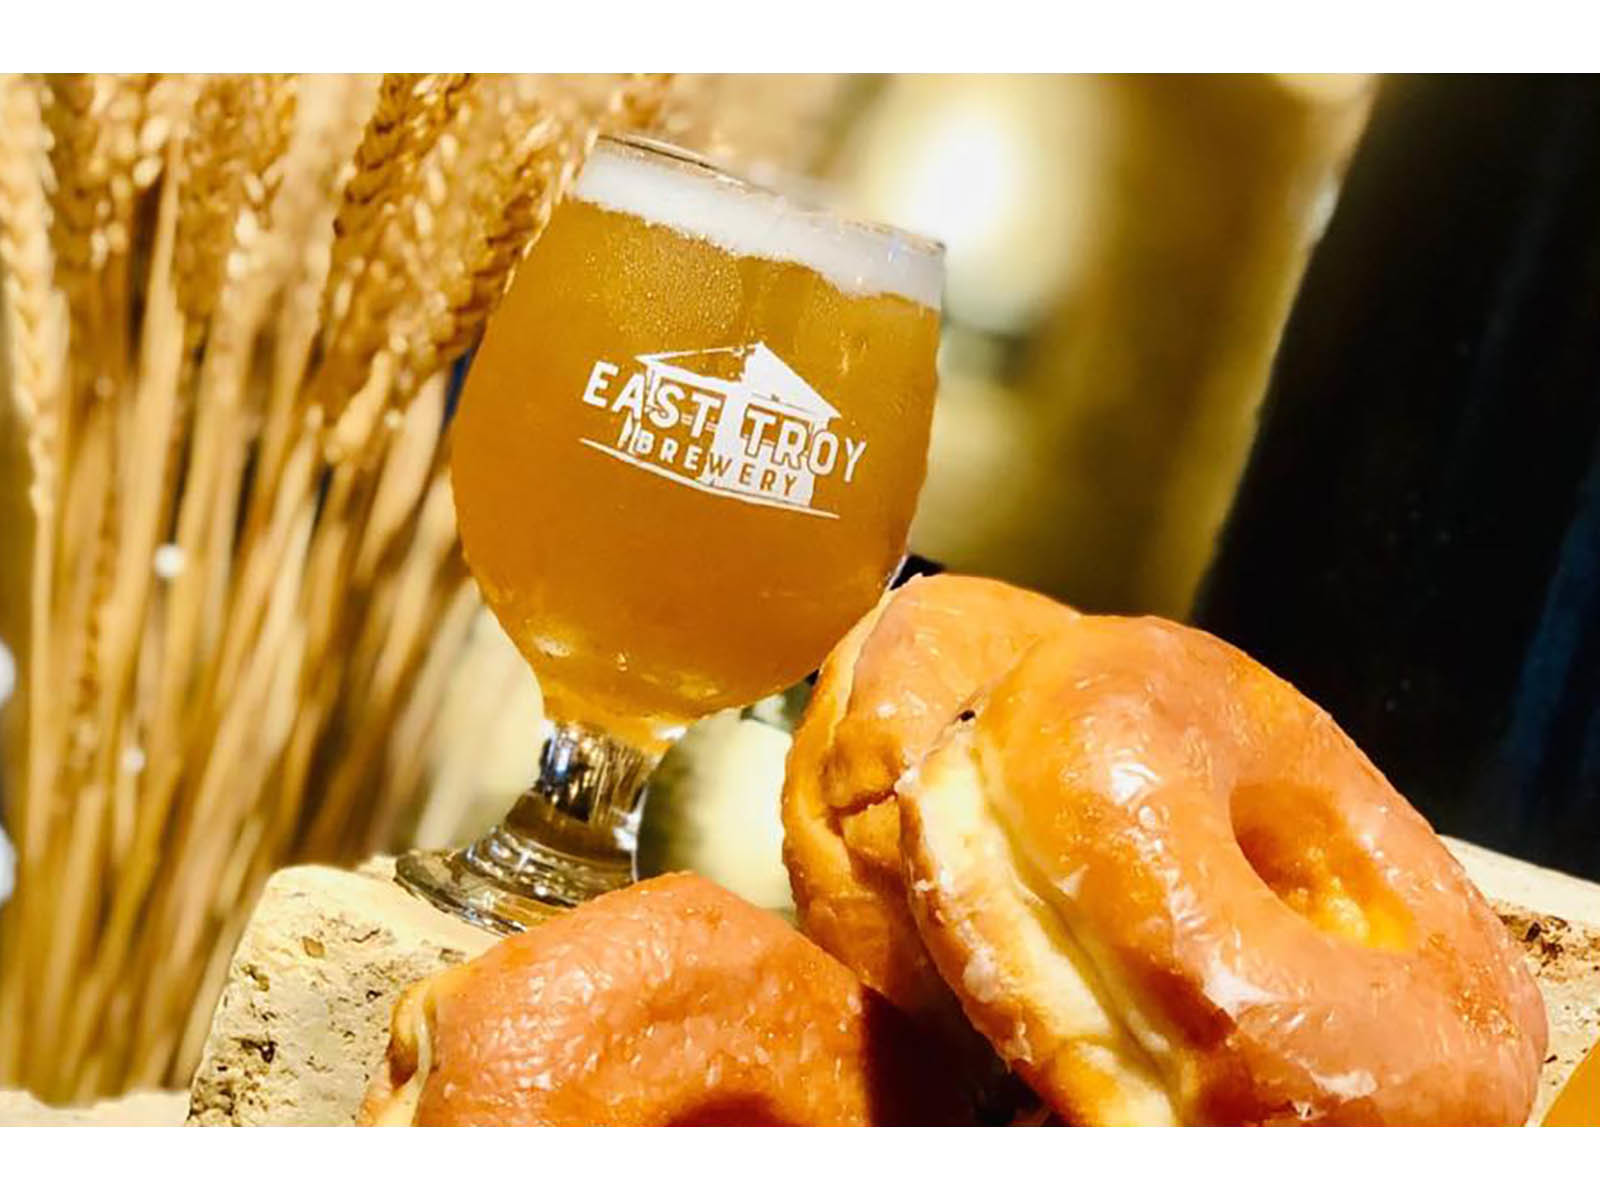 East Troy brews a second beer inspired by Grebe's crullers